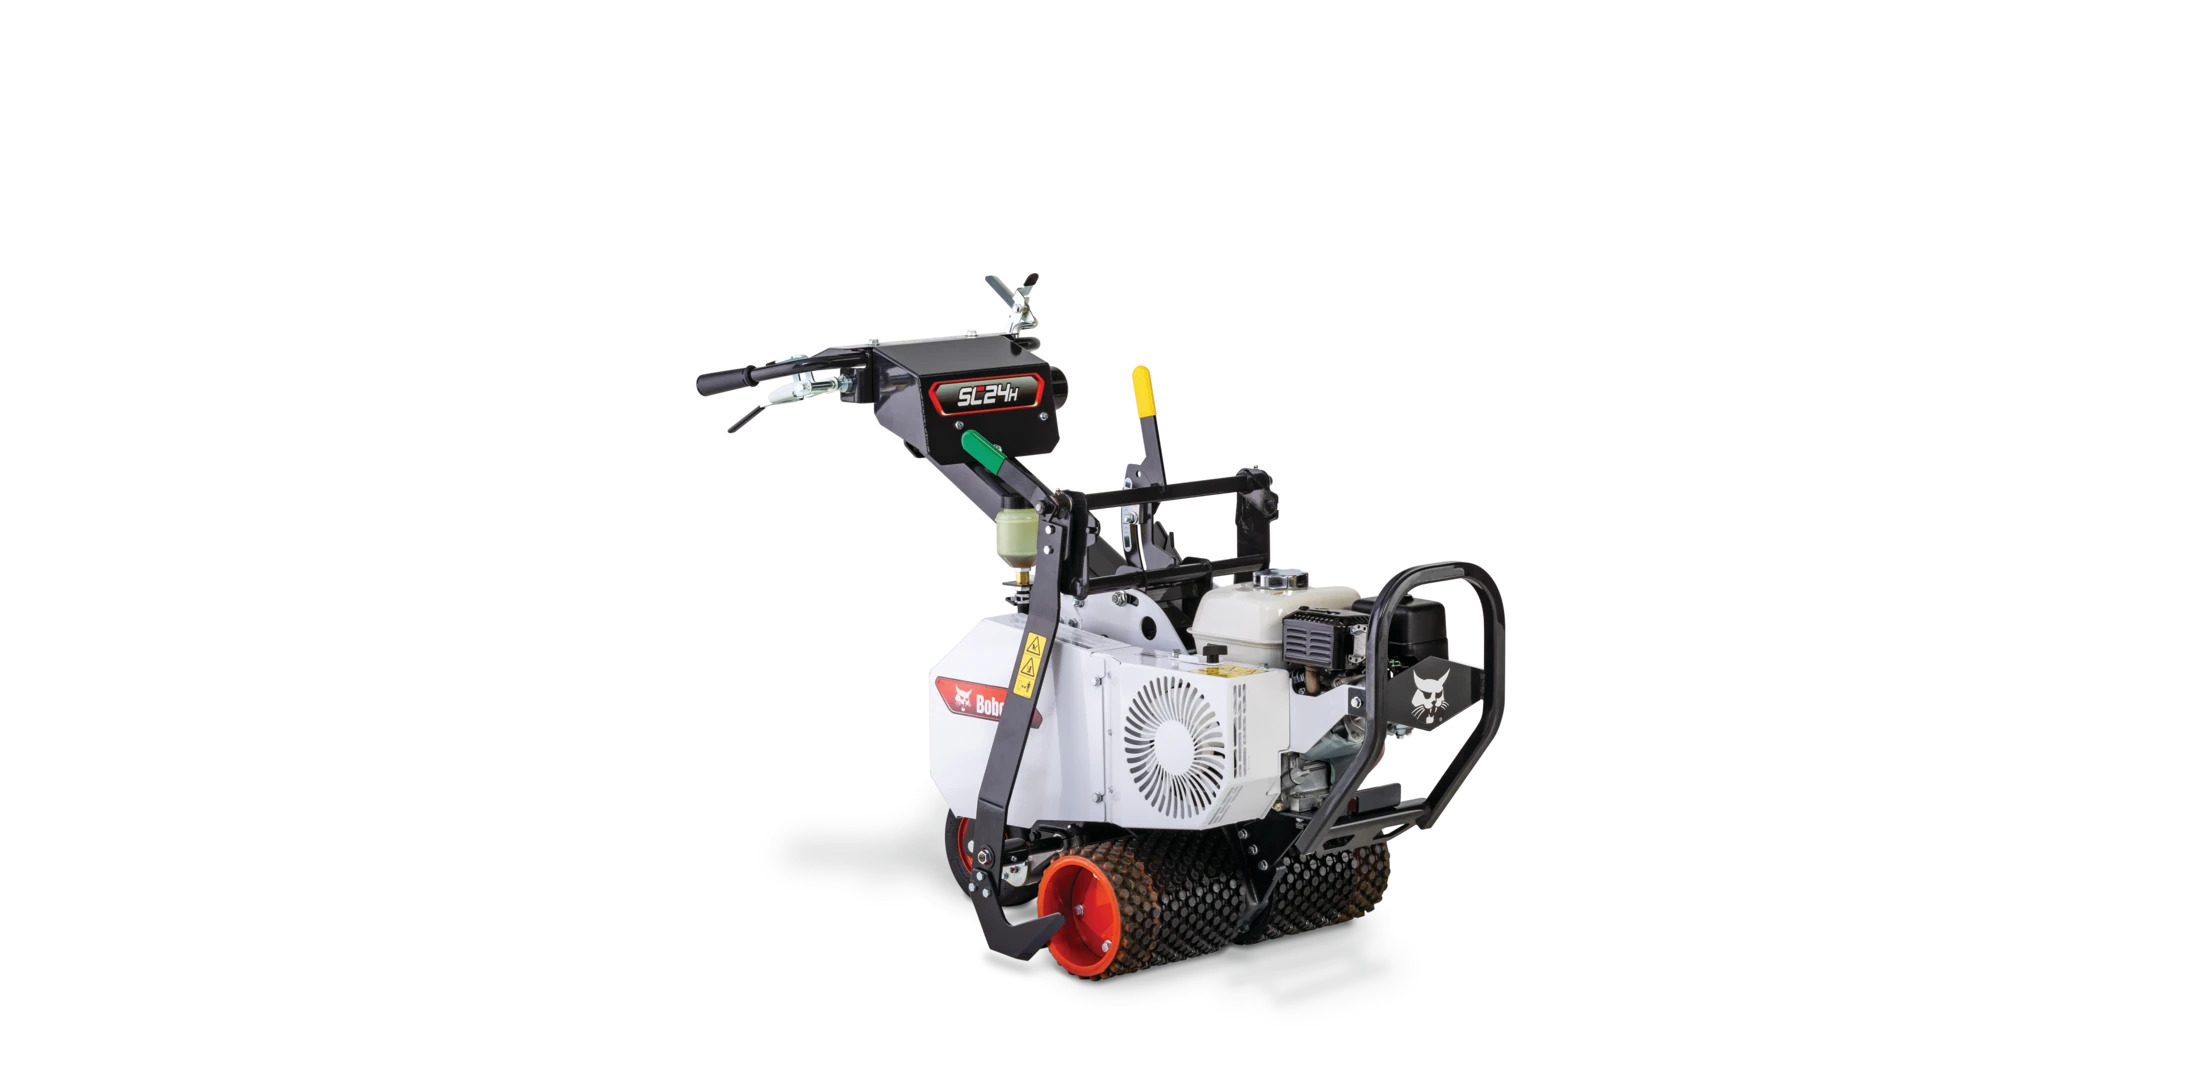 Browse Specs and more for the Bobcat SC24H Sod Cutter – Honda Engine - Bobcat of Indy